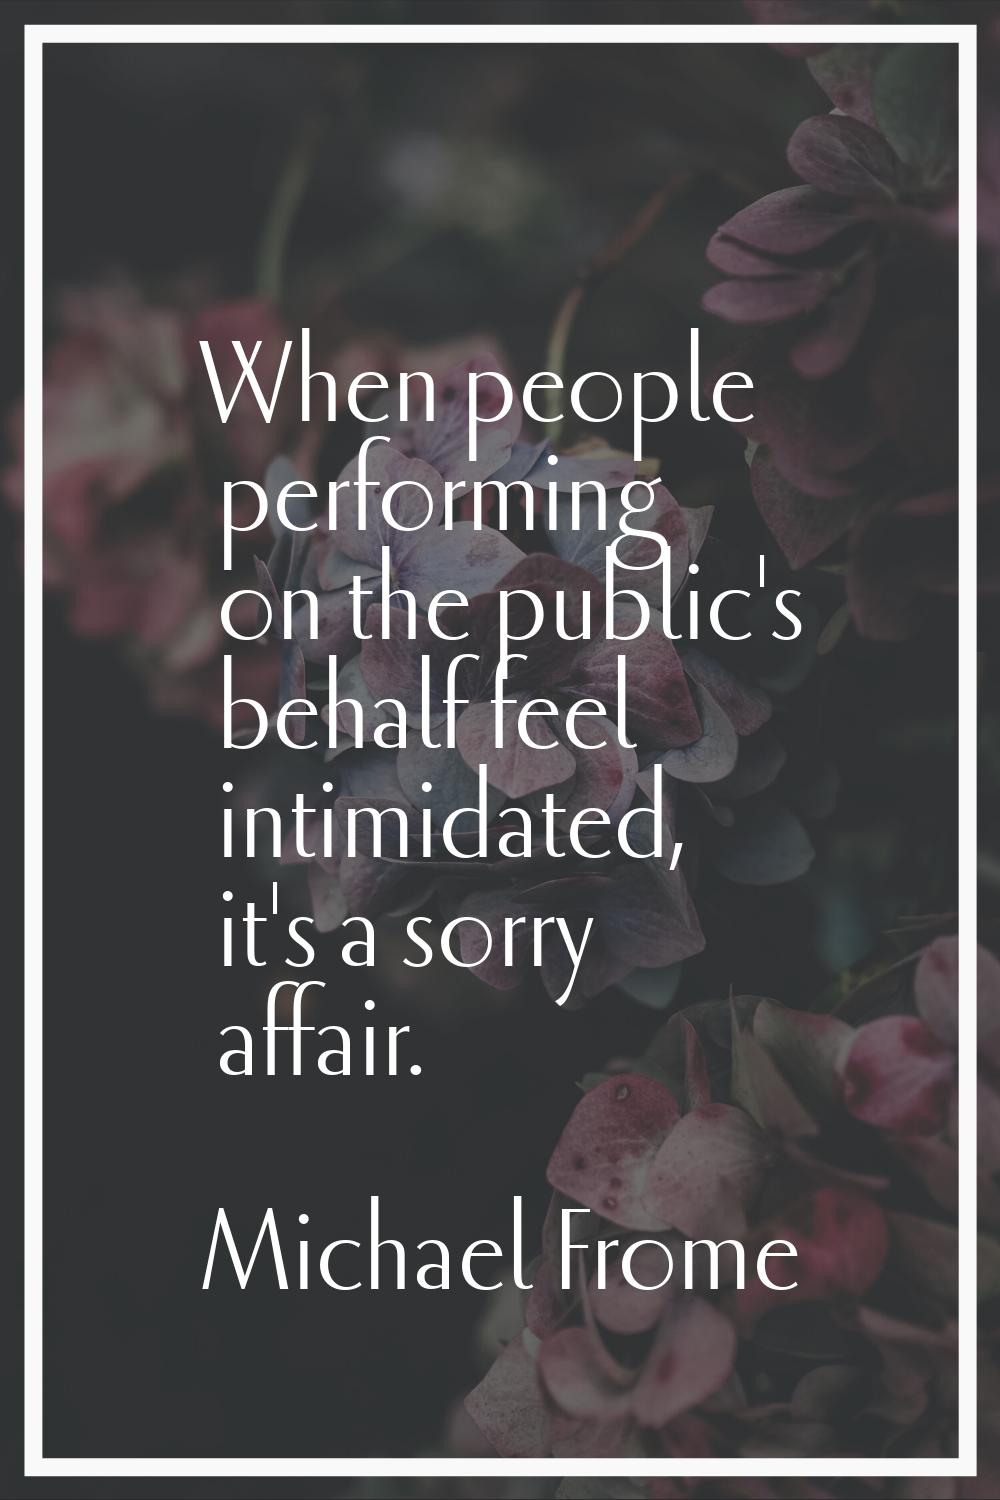 When people performing on the public's behalf feel intimidated, it's a sorry affair.